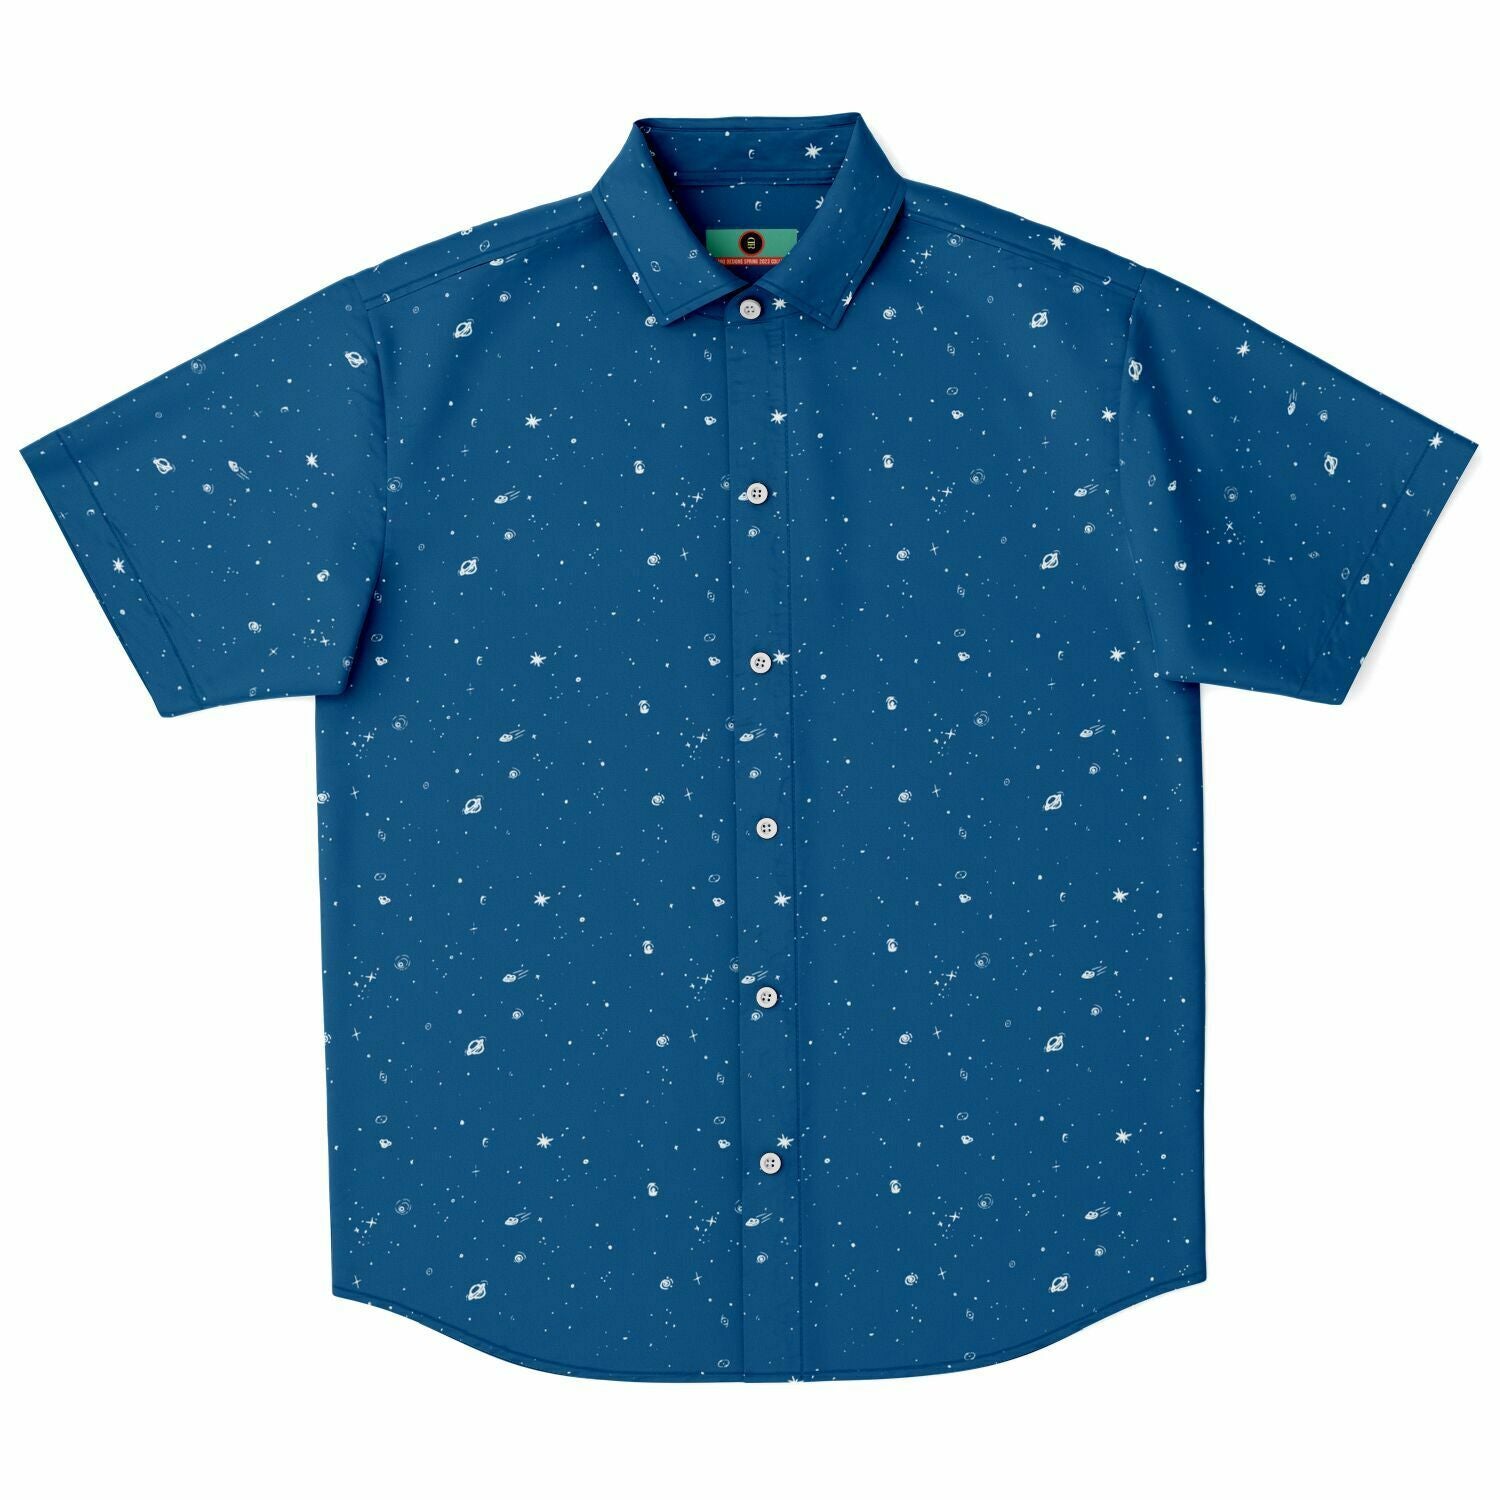 Galaxy Print Re-Release Button-Up - Dusk